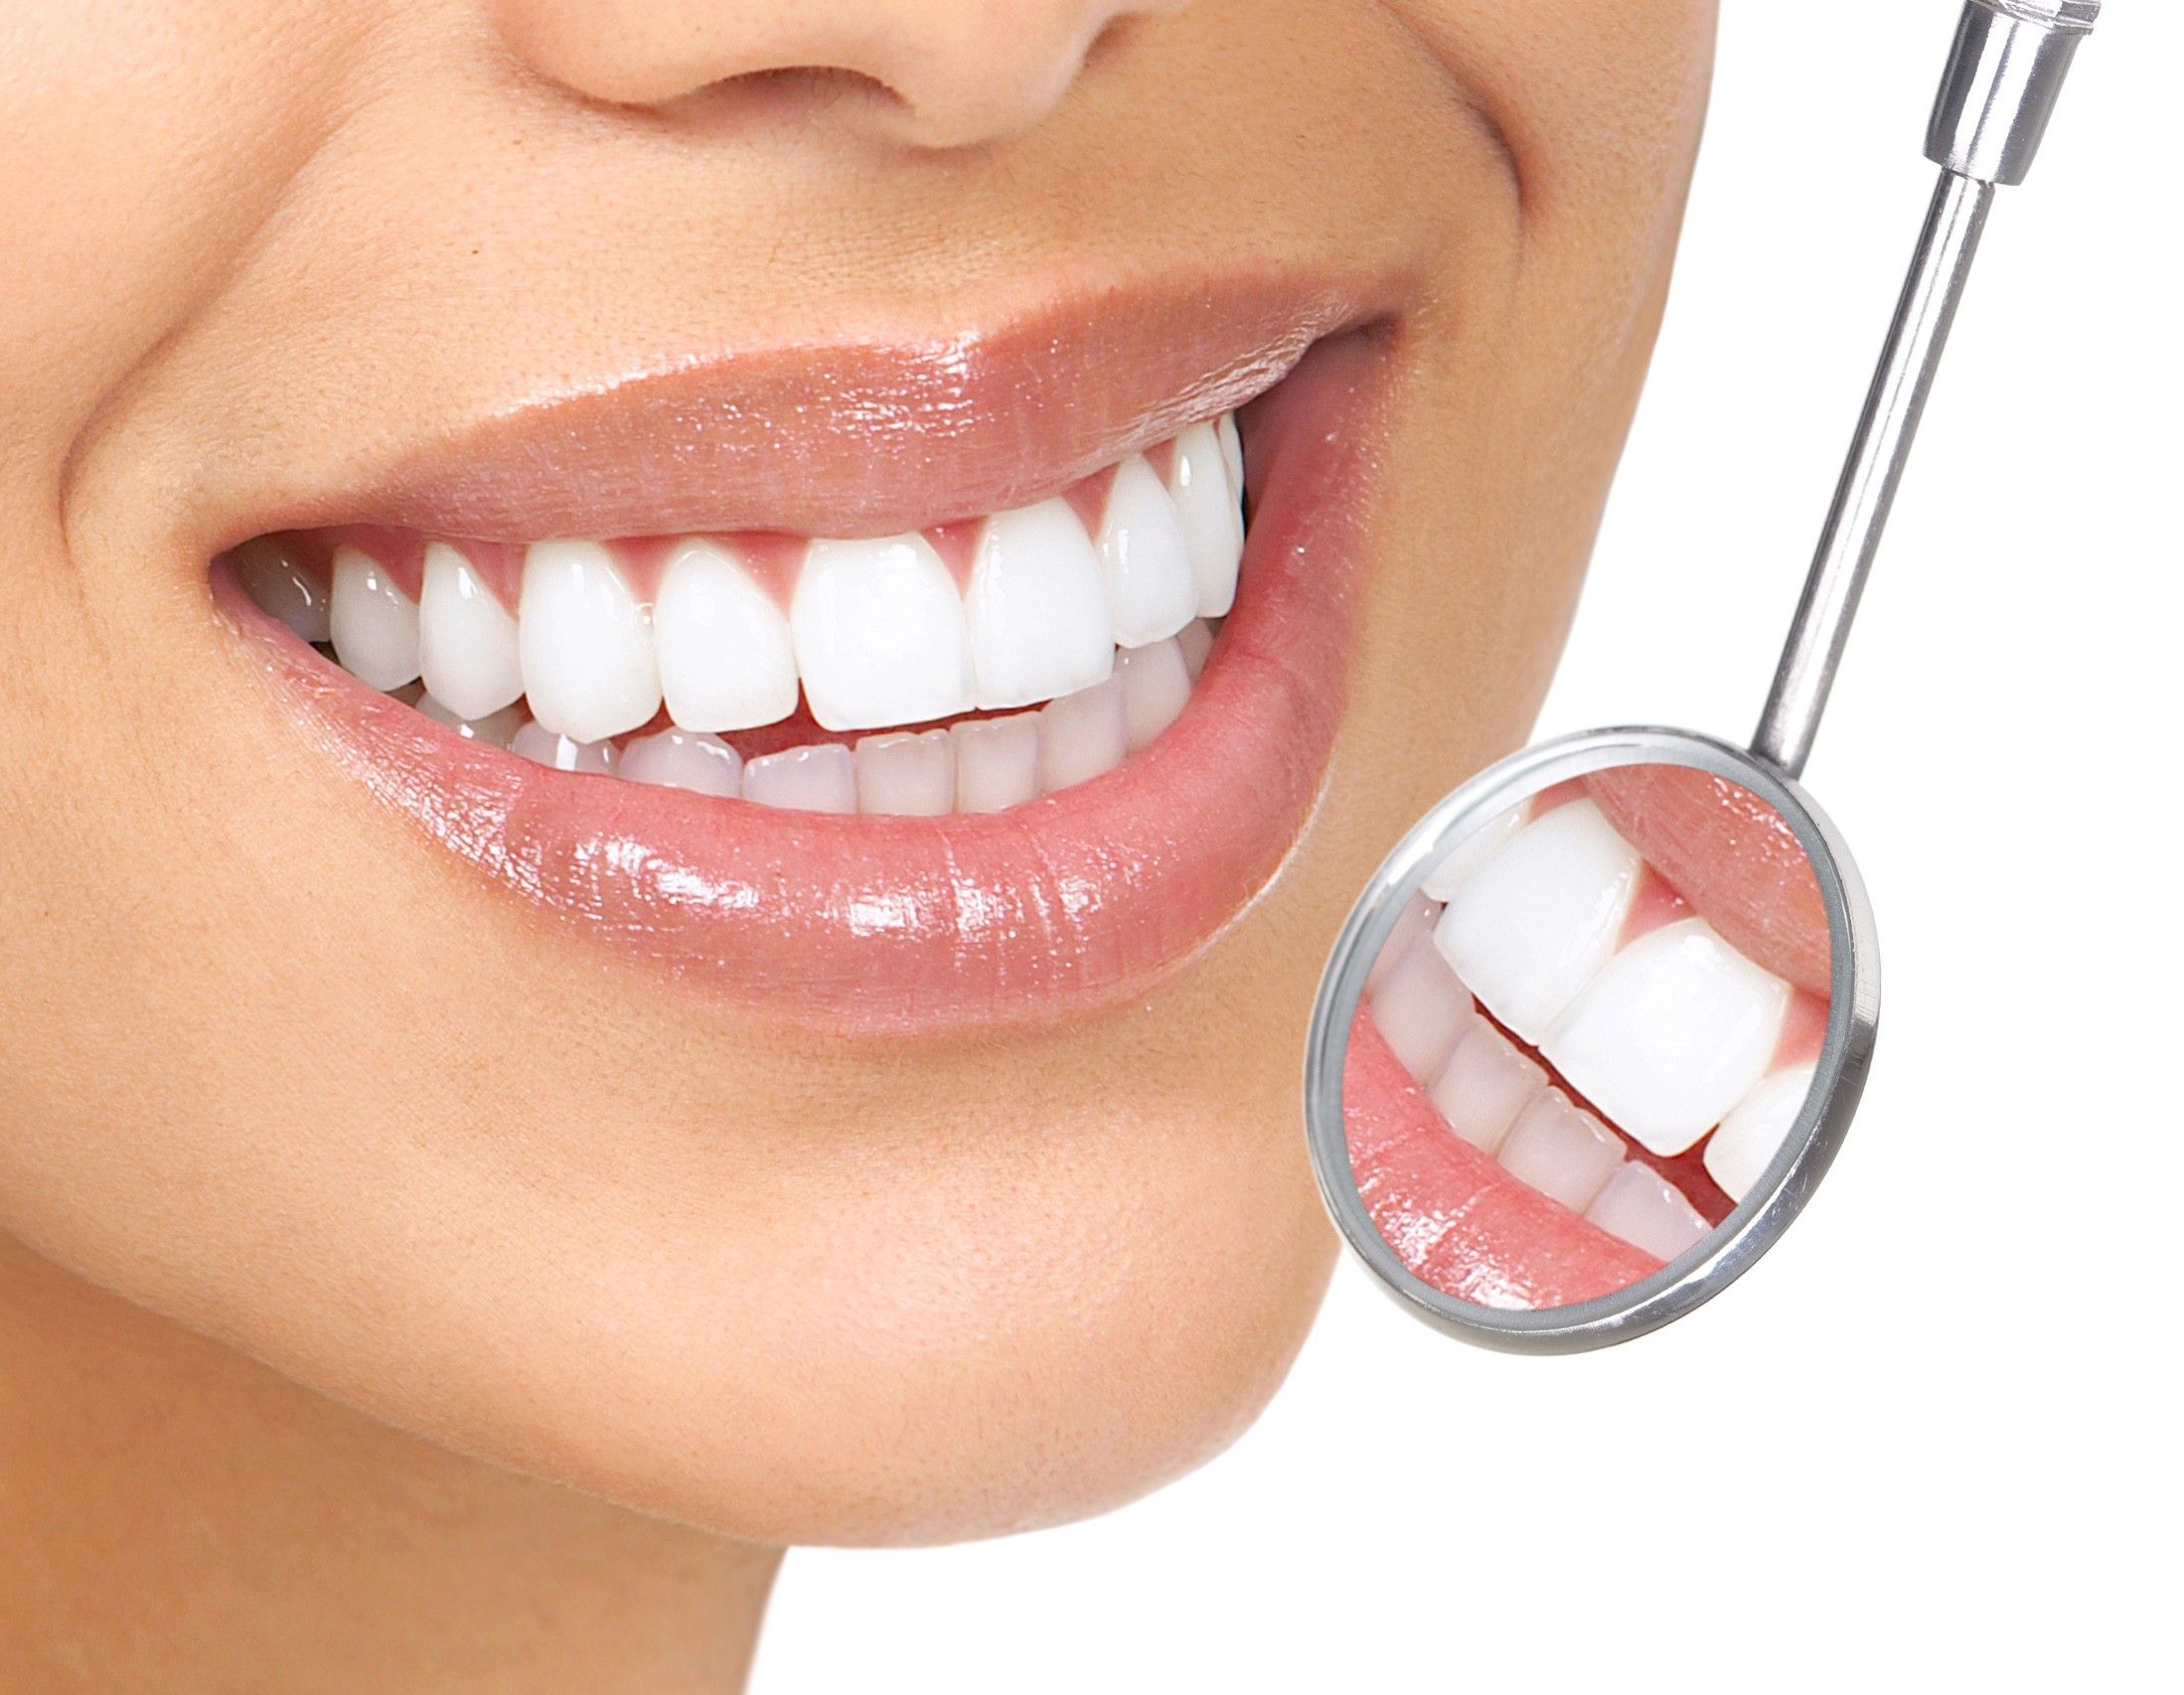 Teeth whitening, the simple way to regain your smile